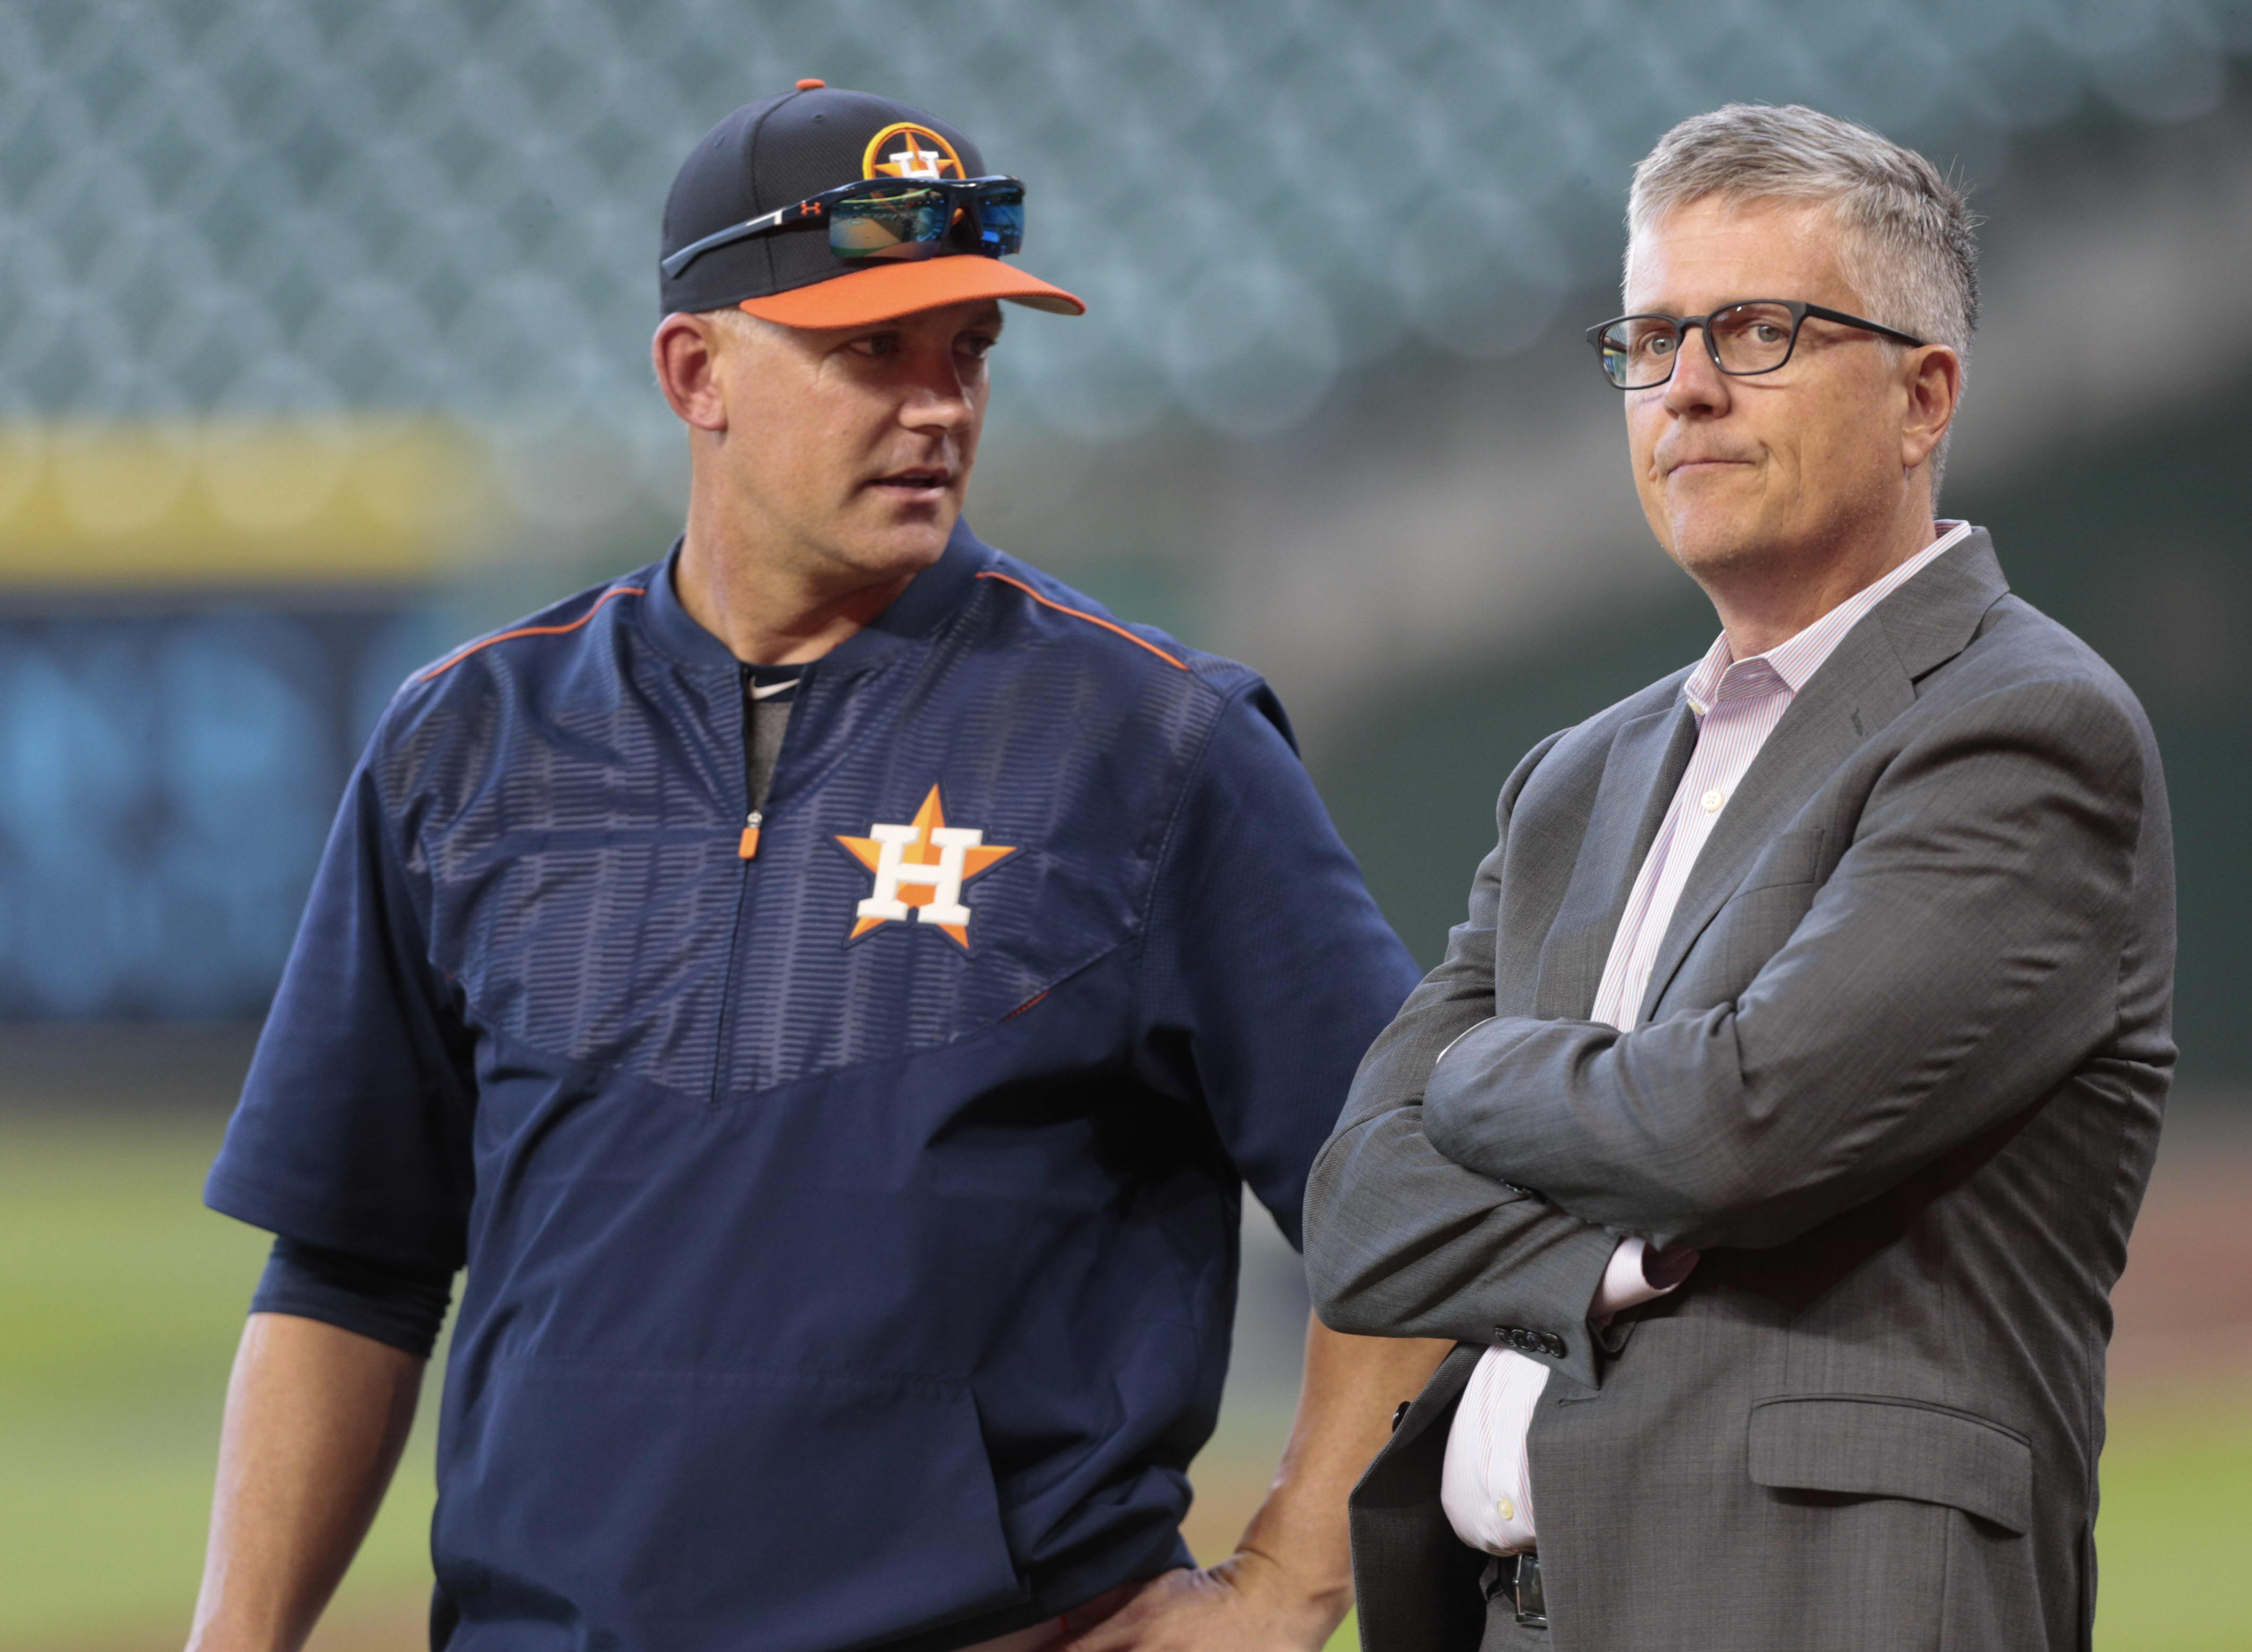 MLB Pitcher's Heard About New Astros Cheating Allegations - The